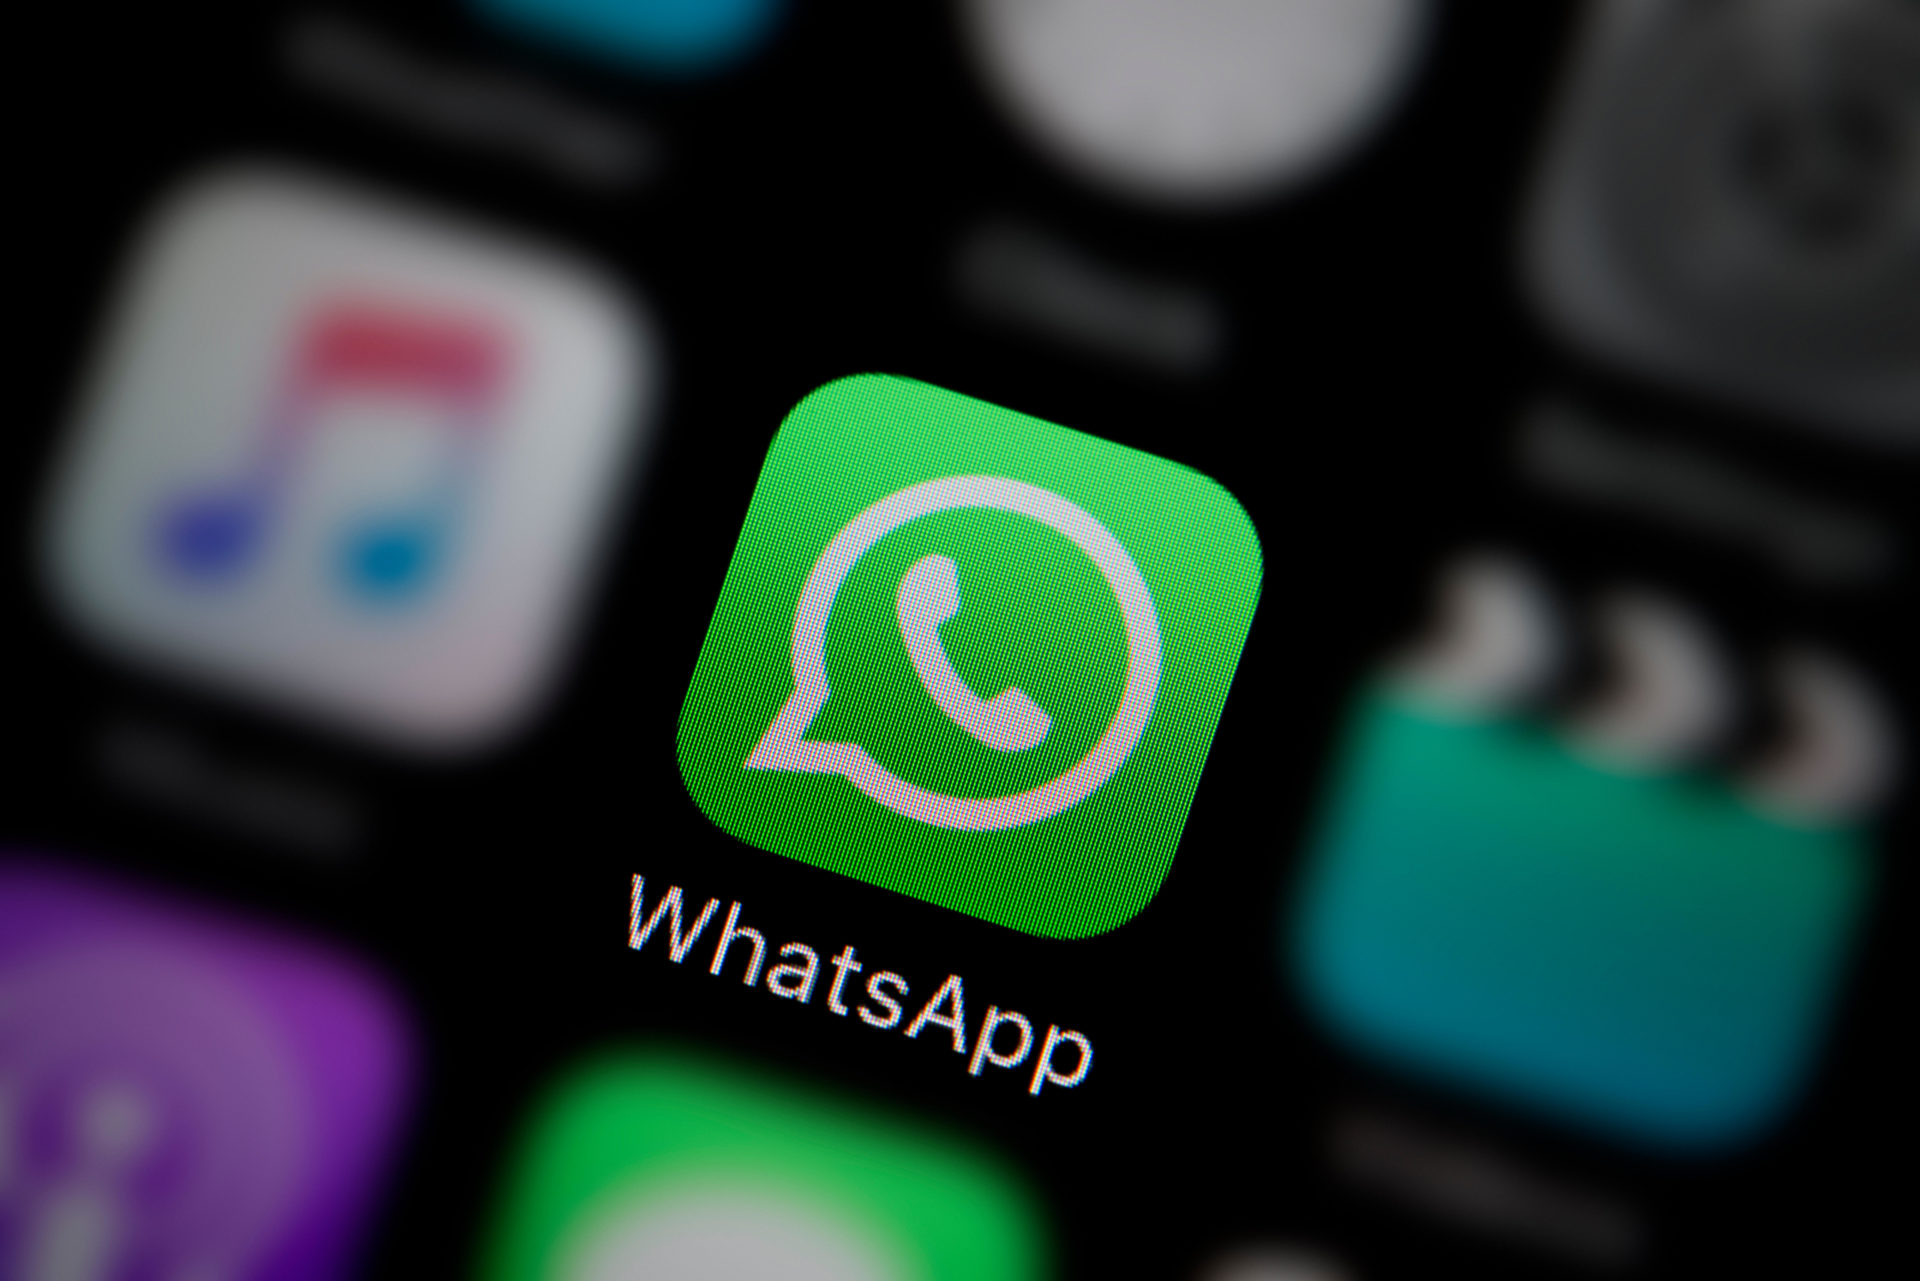 A close-up shot of the WhatsApp app icon on the screen of a smart phone